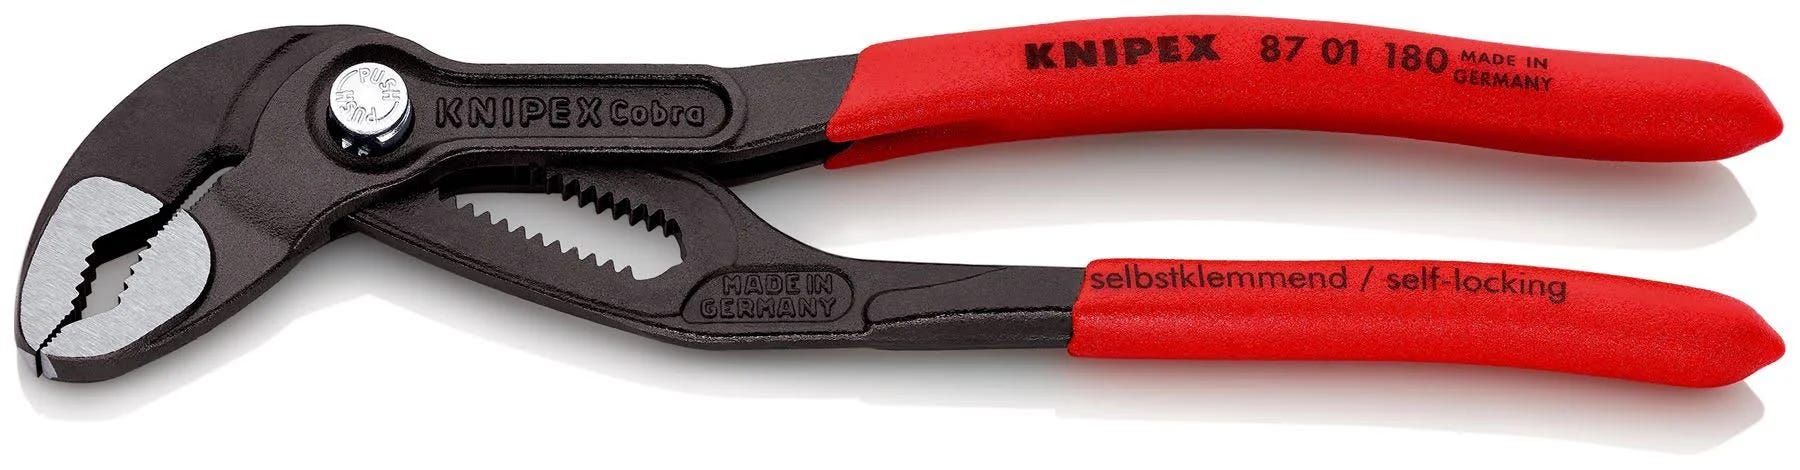 Knipex 7-1/4-Inch Cobra Pliers | Image